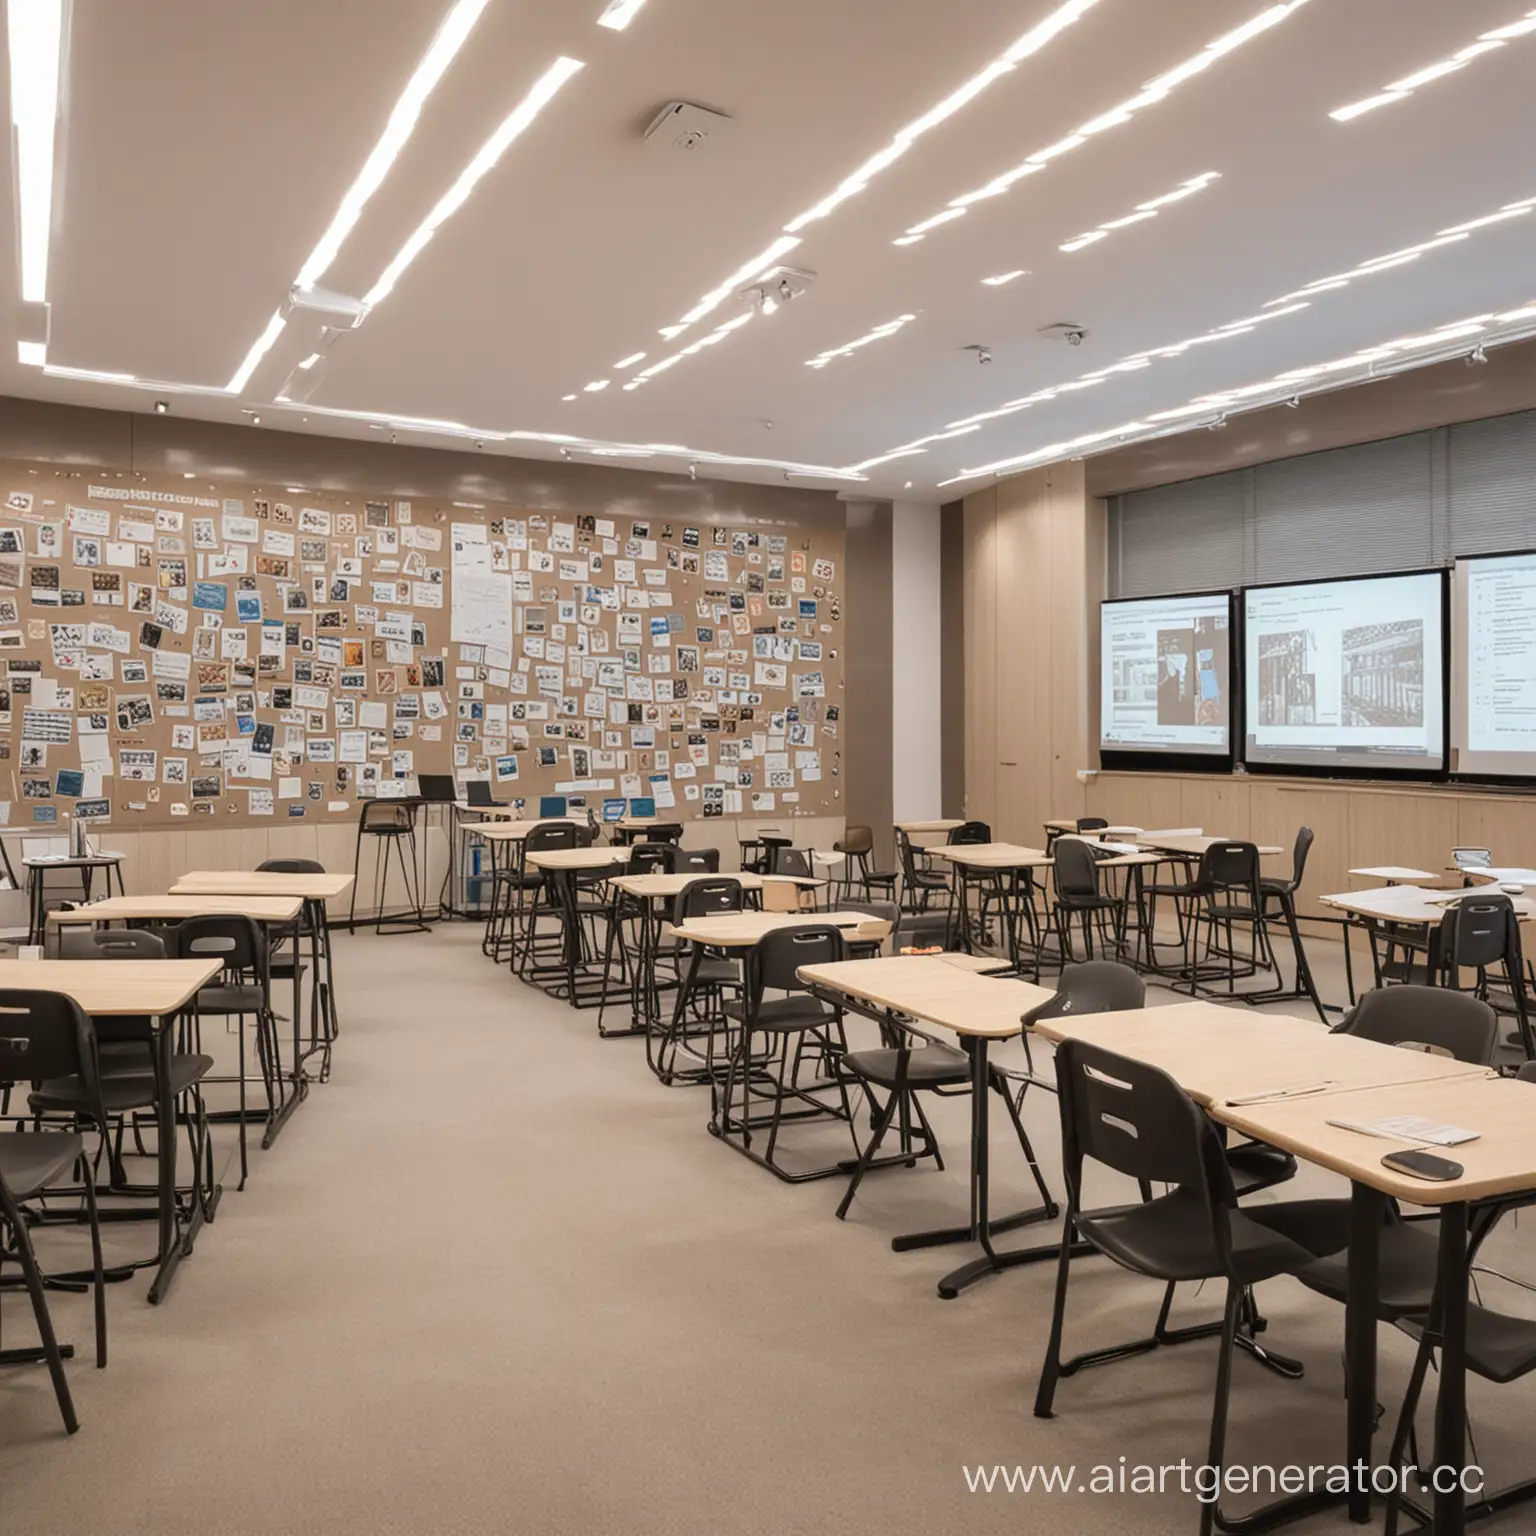 the Russian language classroom of the school of the future